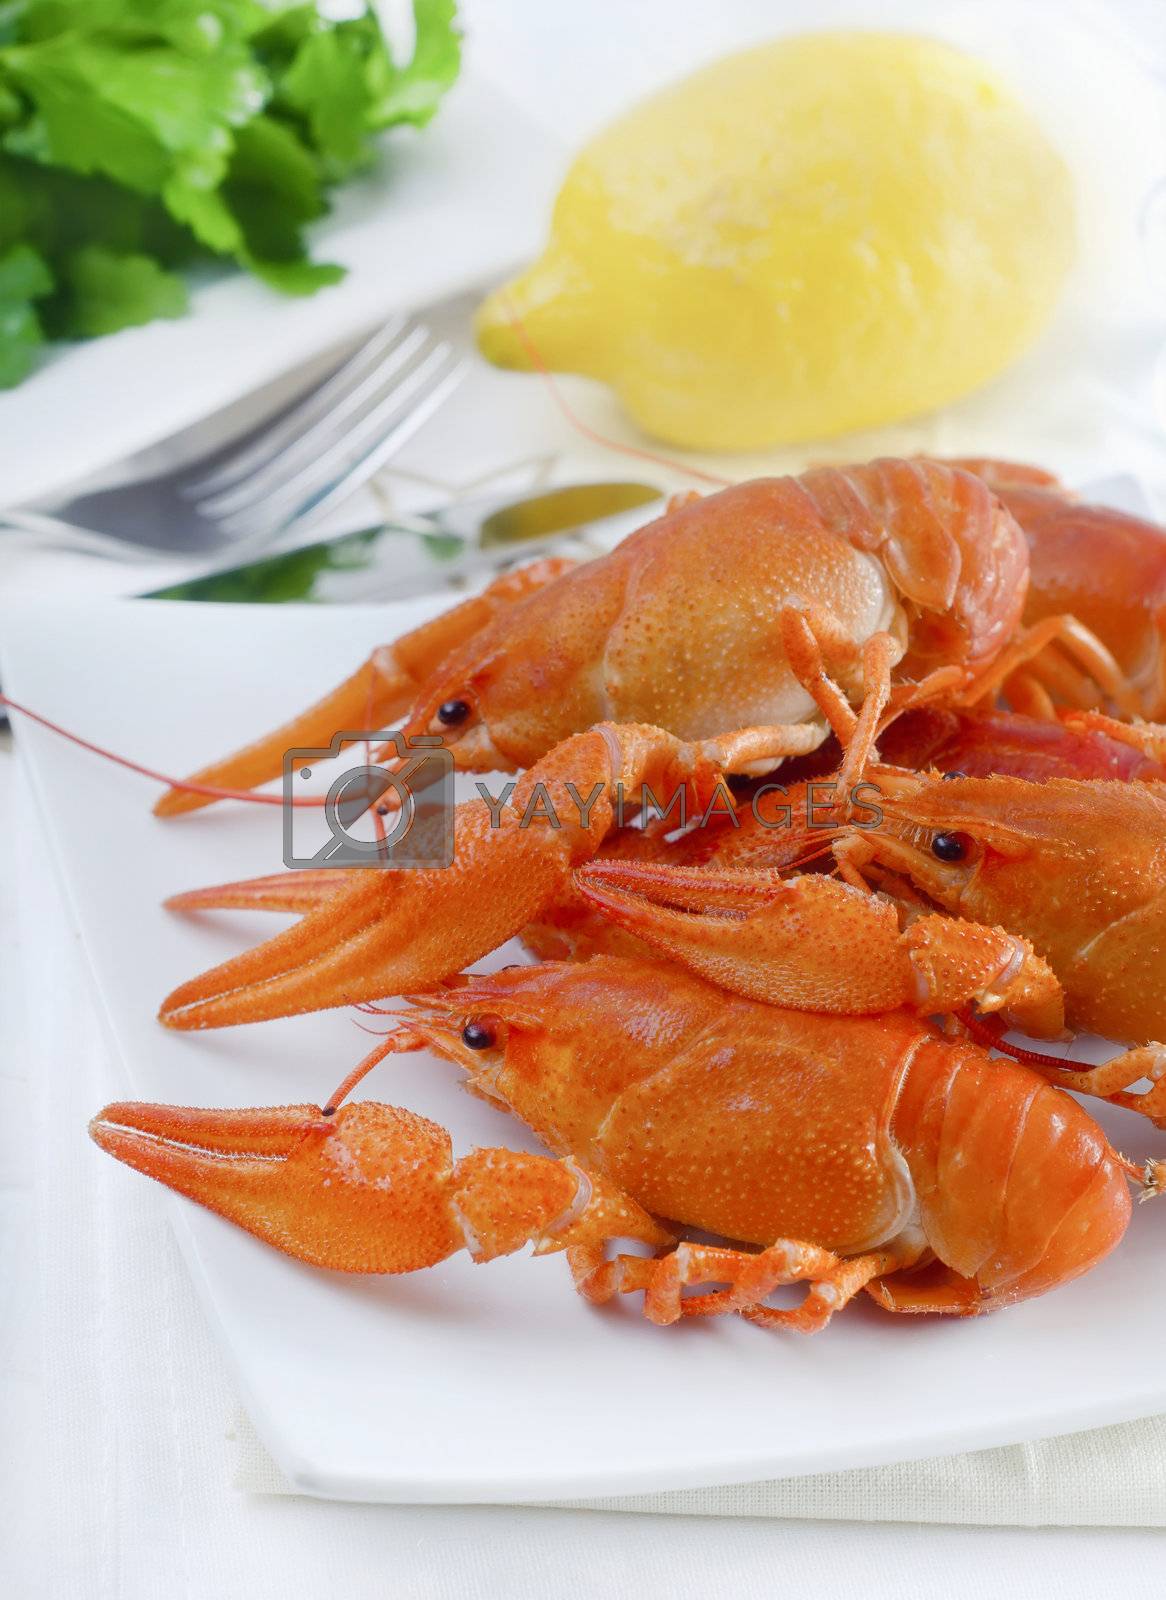 Royalty free image of crayfish by tycoon